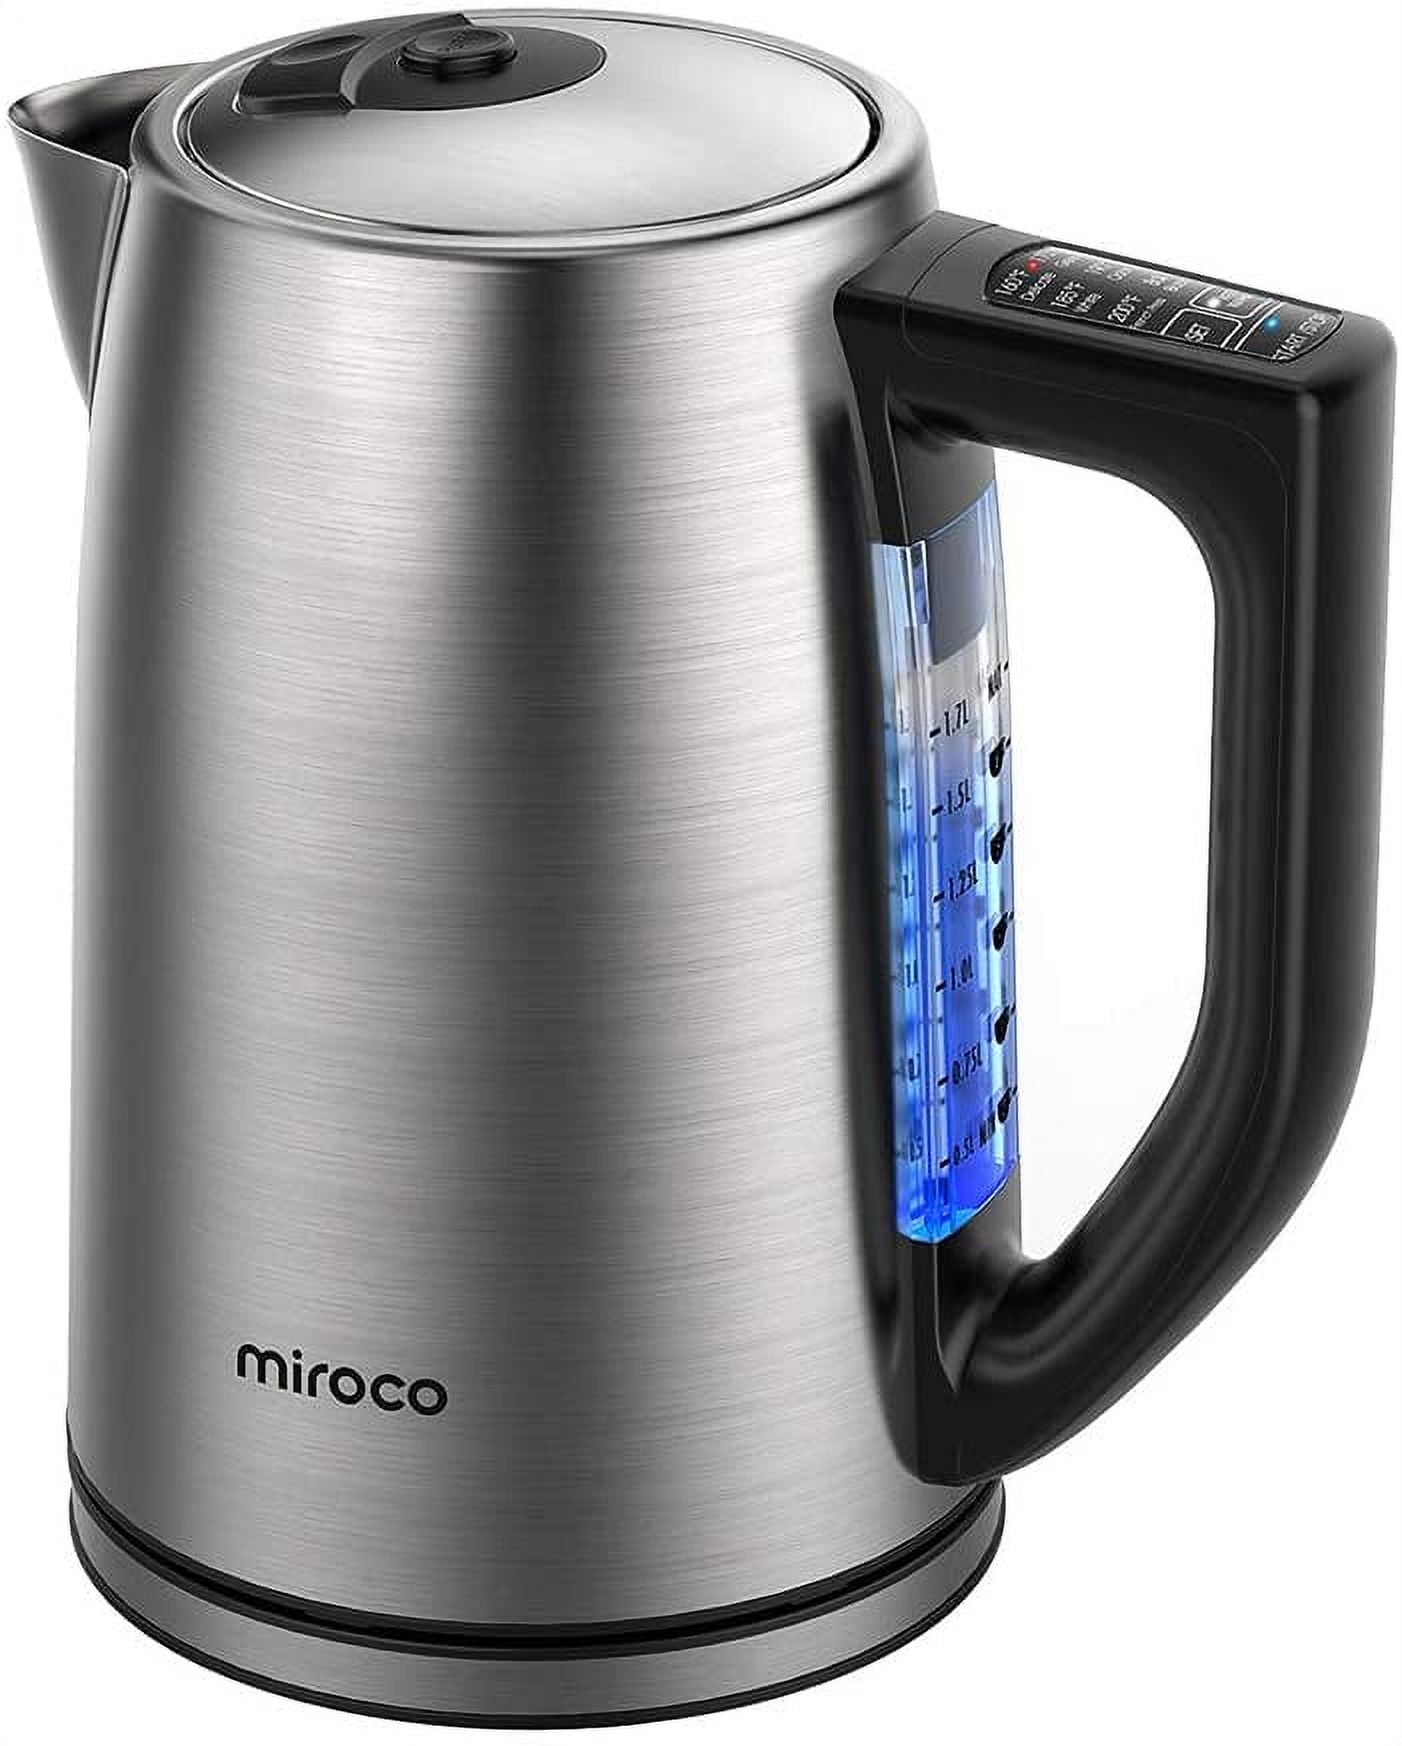 Miroco Electric Glass Tea Kettle Review